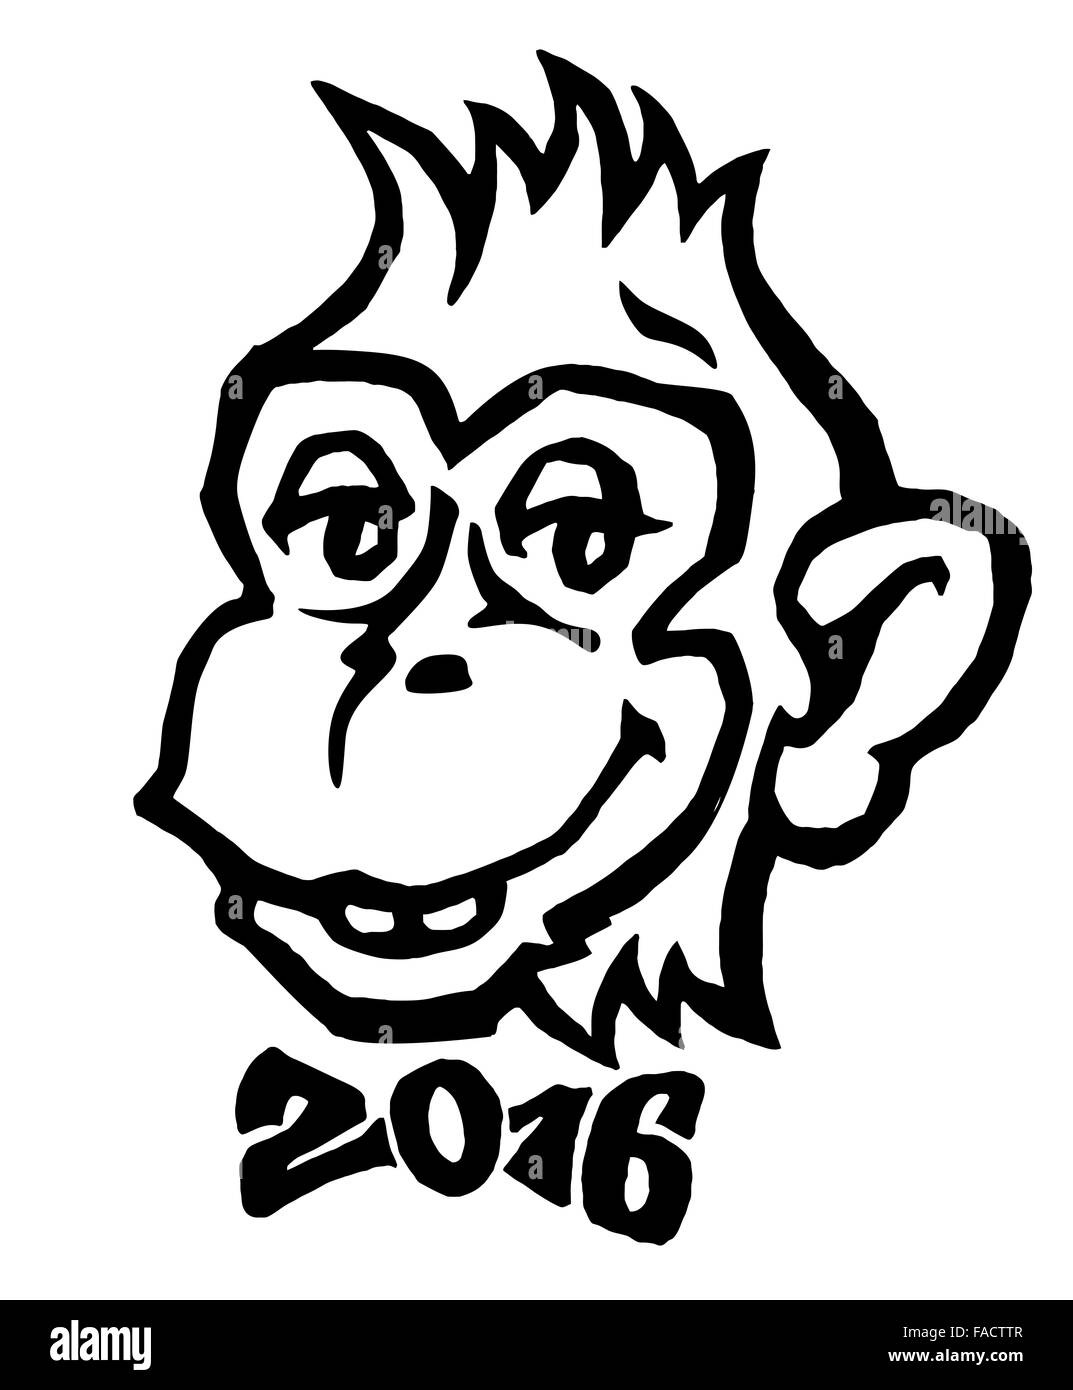 2016 - Year of the monkey. Smiling monkey with 2016 bow tie vector illustration Stock Photo